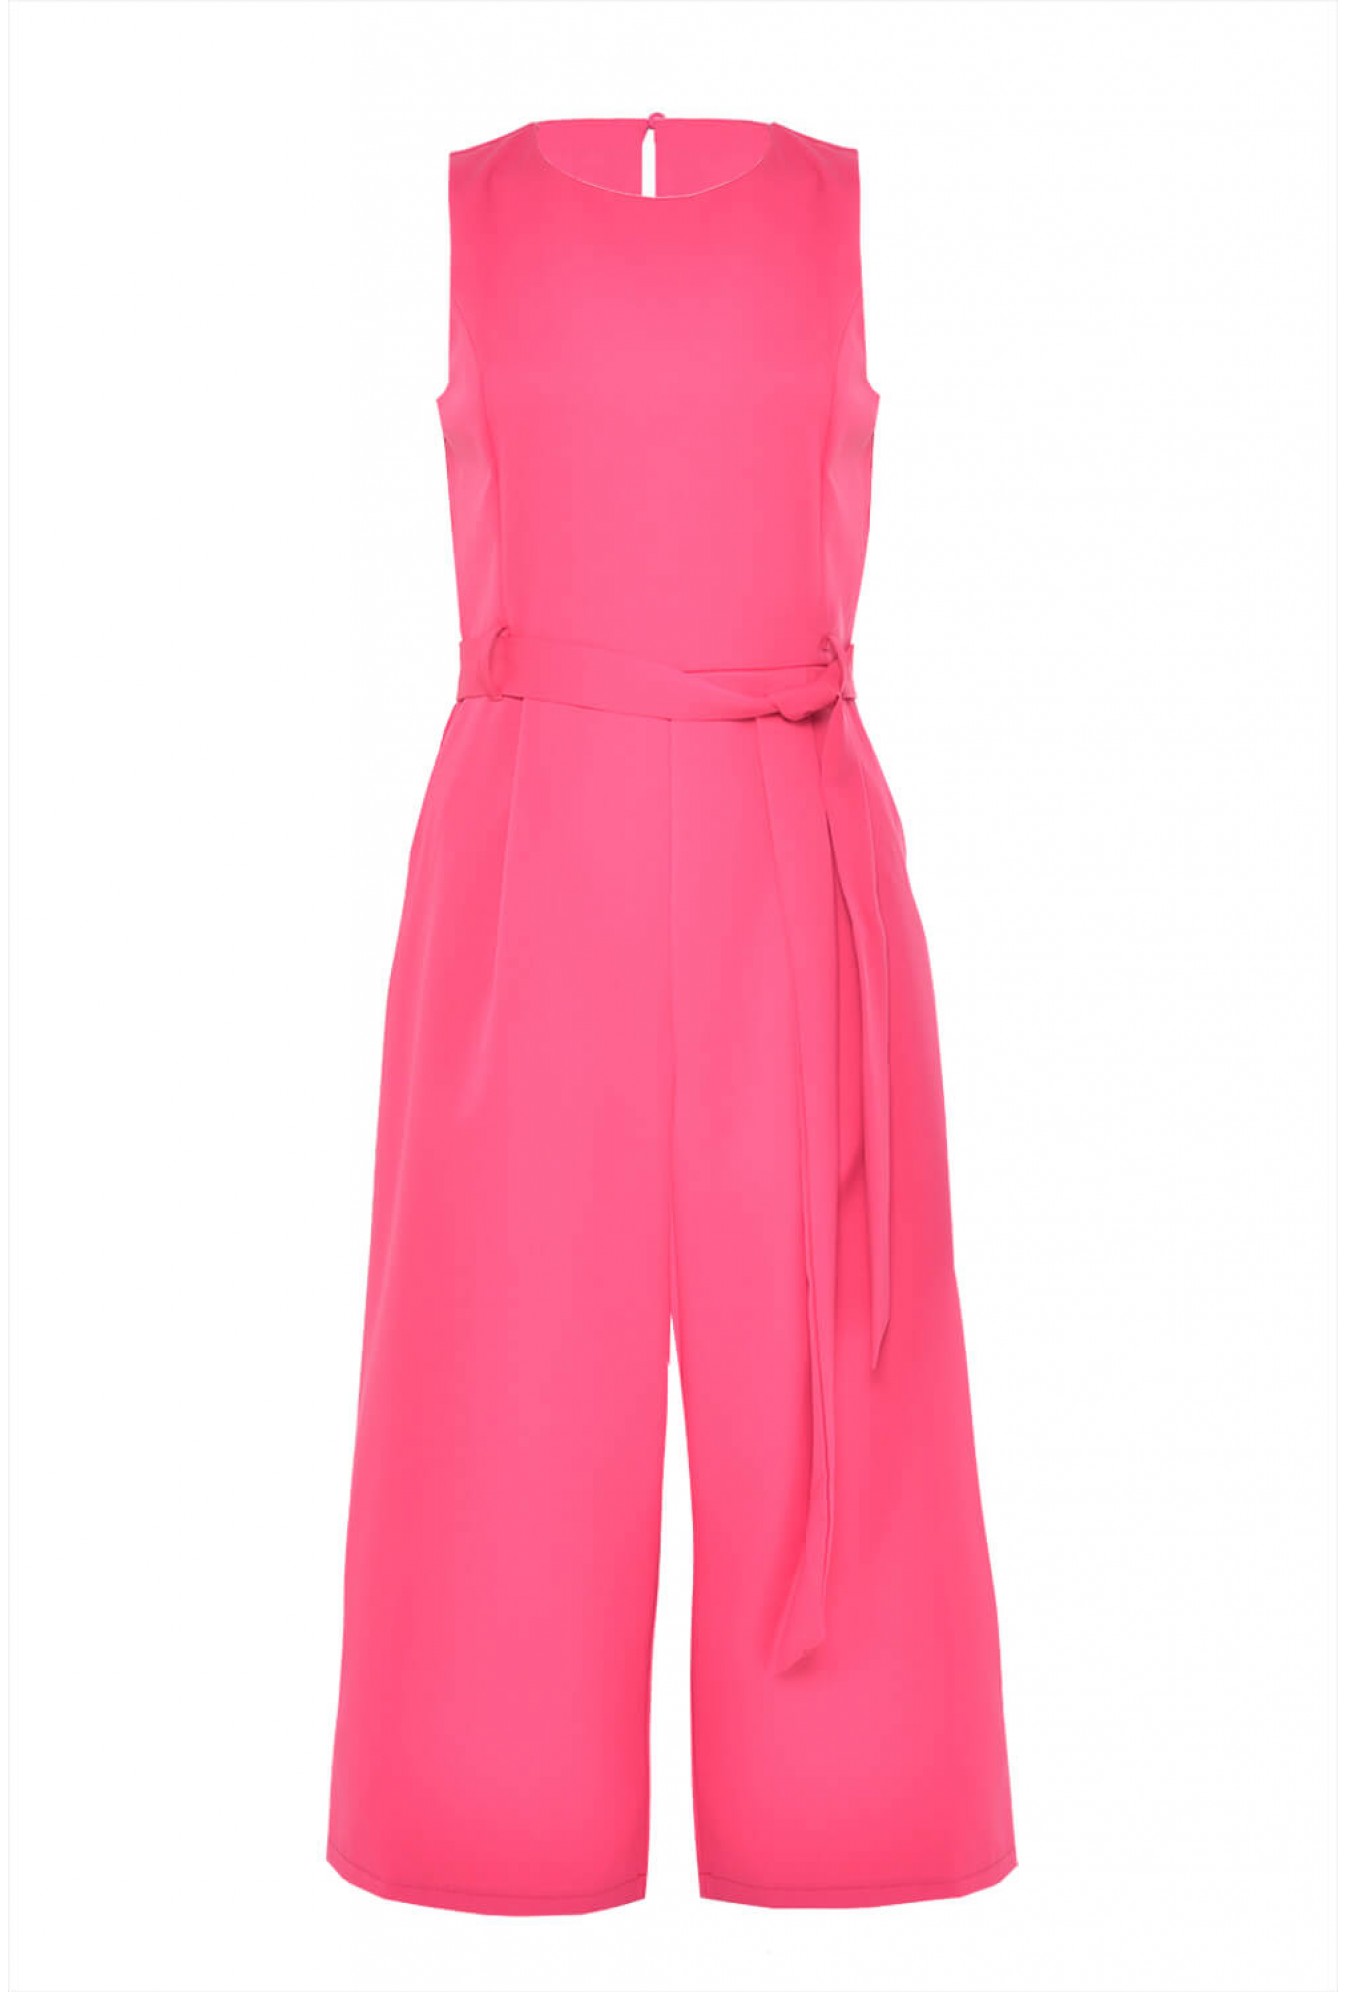 Marc Angelo Layla Longline Culotte Jumpsuit in Pink | iCLOTHING